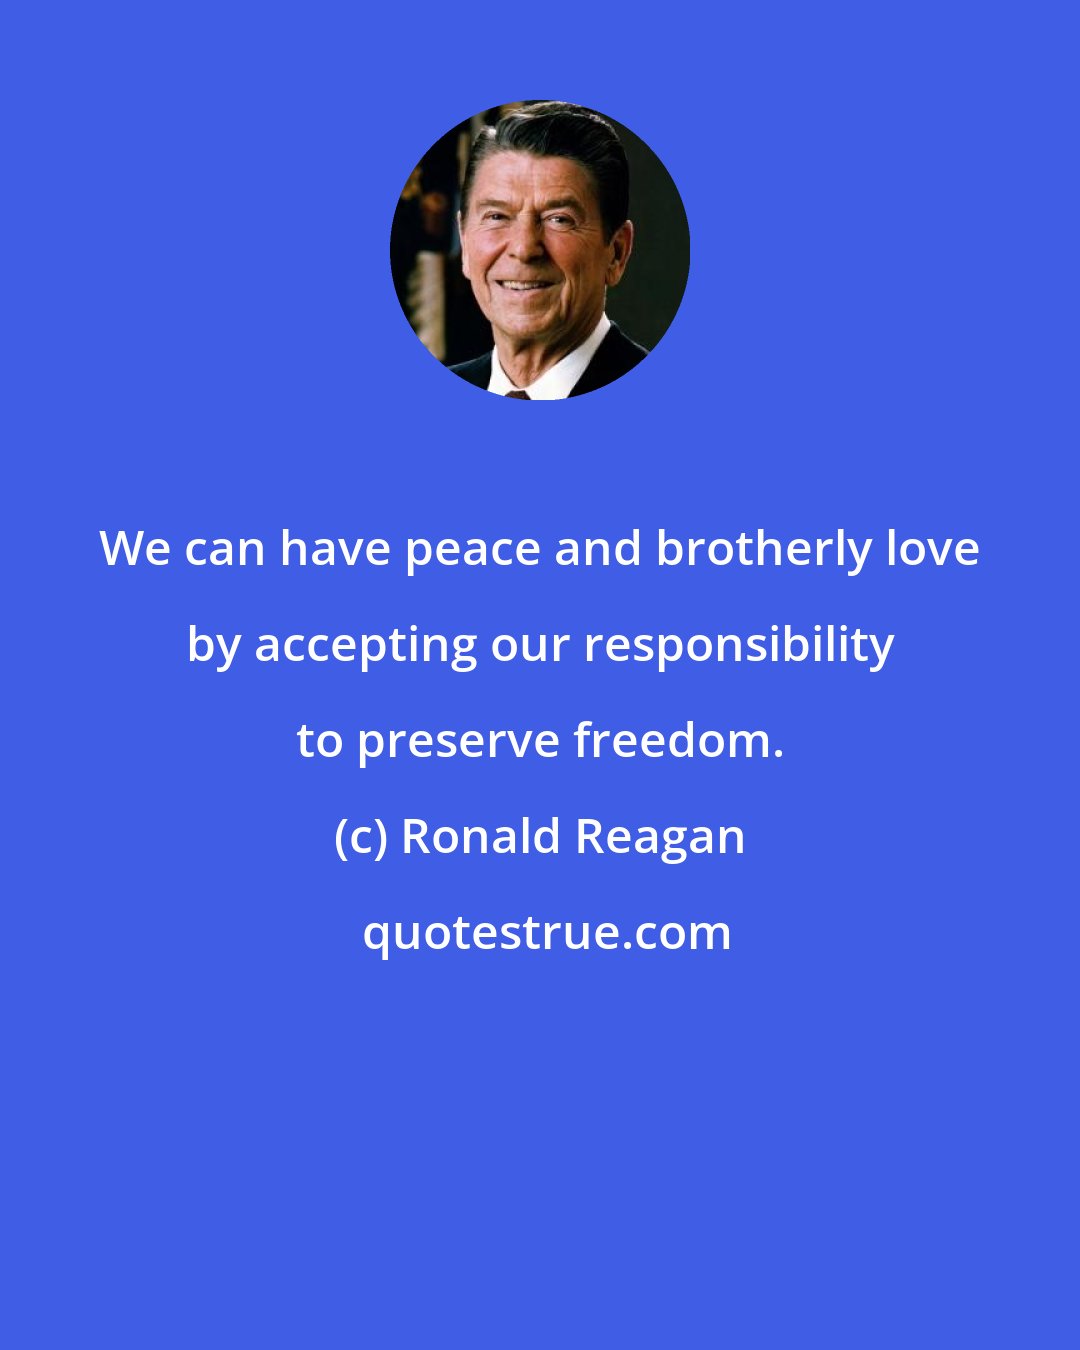 Ronald Reagan: We can have peace and brotherly love by accepting our responsibility to preserve freedom.